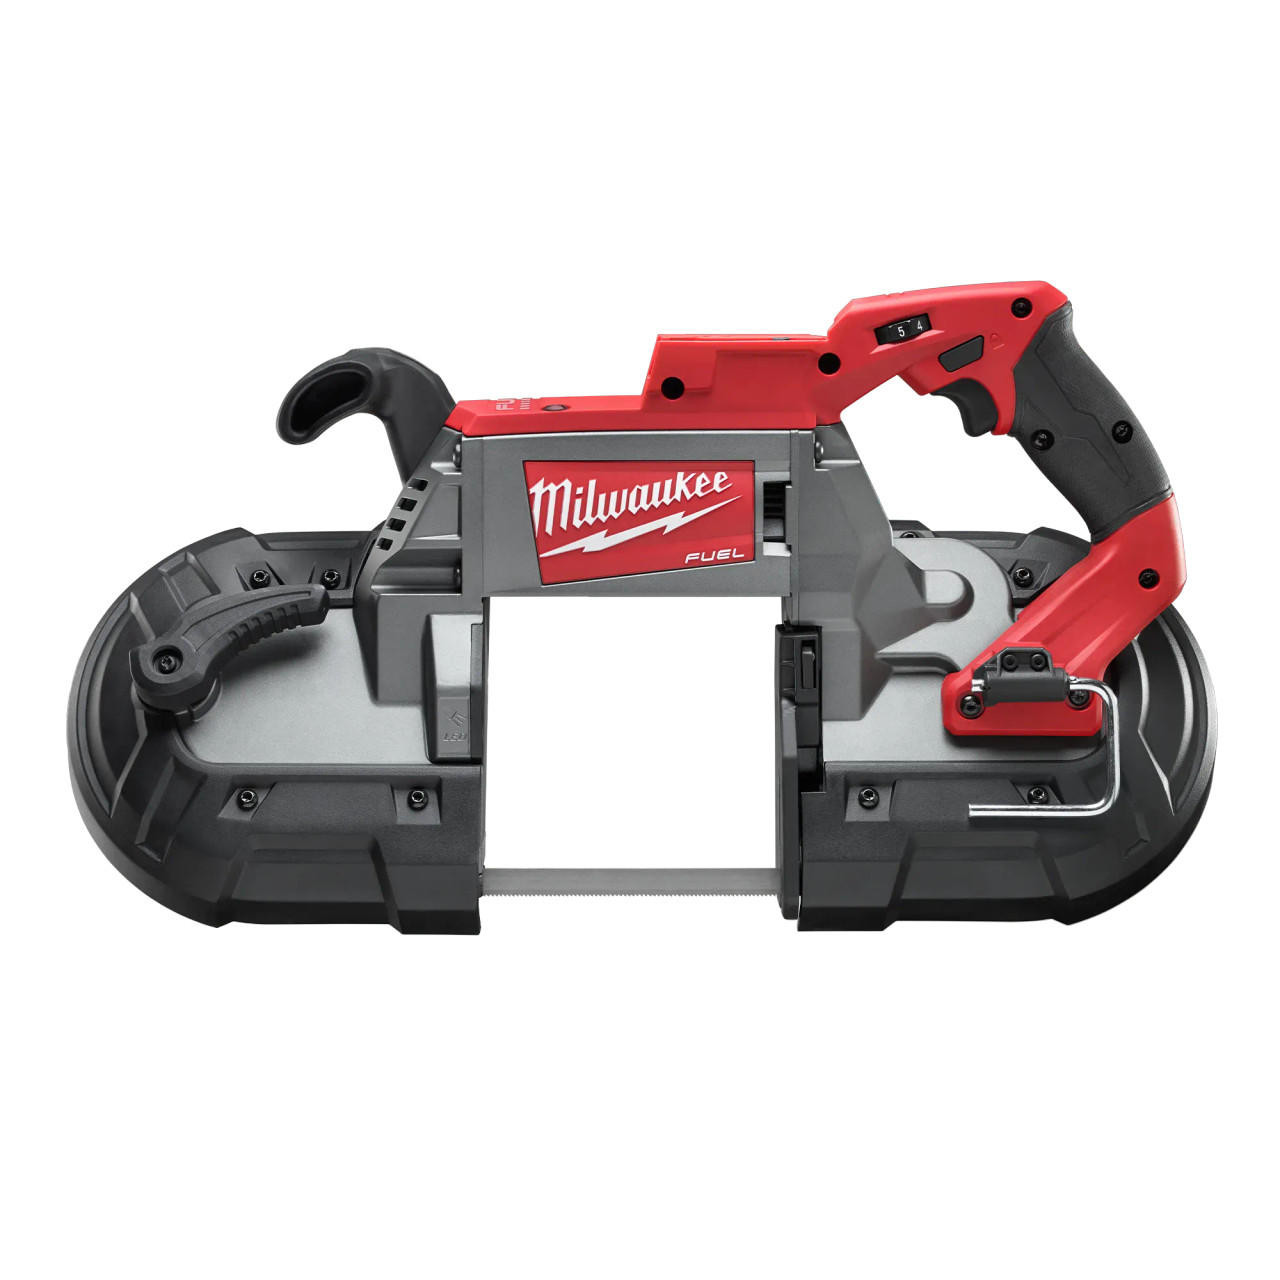  Milwaukee M18 FUEL Deep Cut Band Saw (Tool Only) 2729-20 